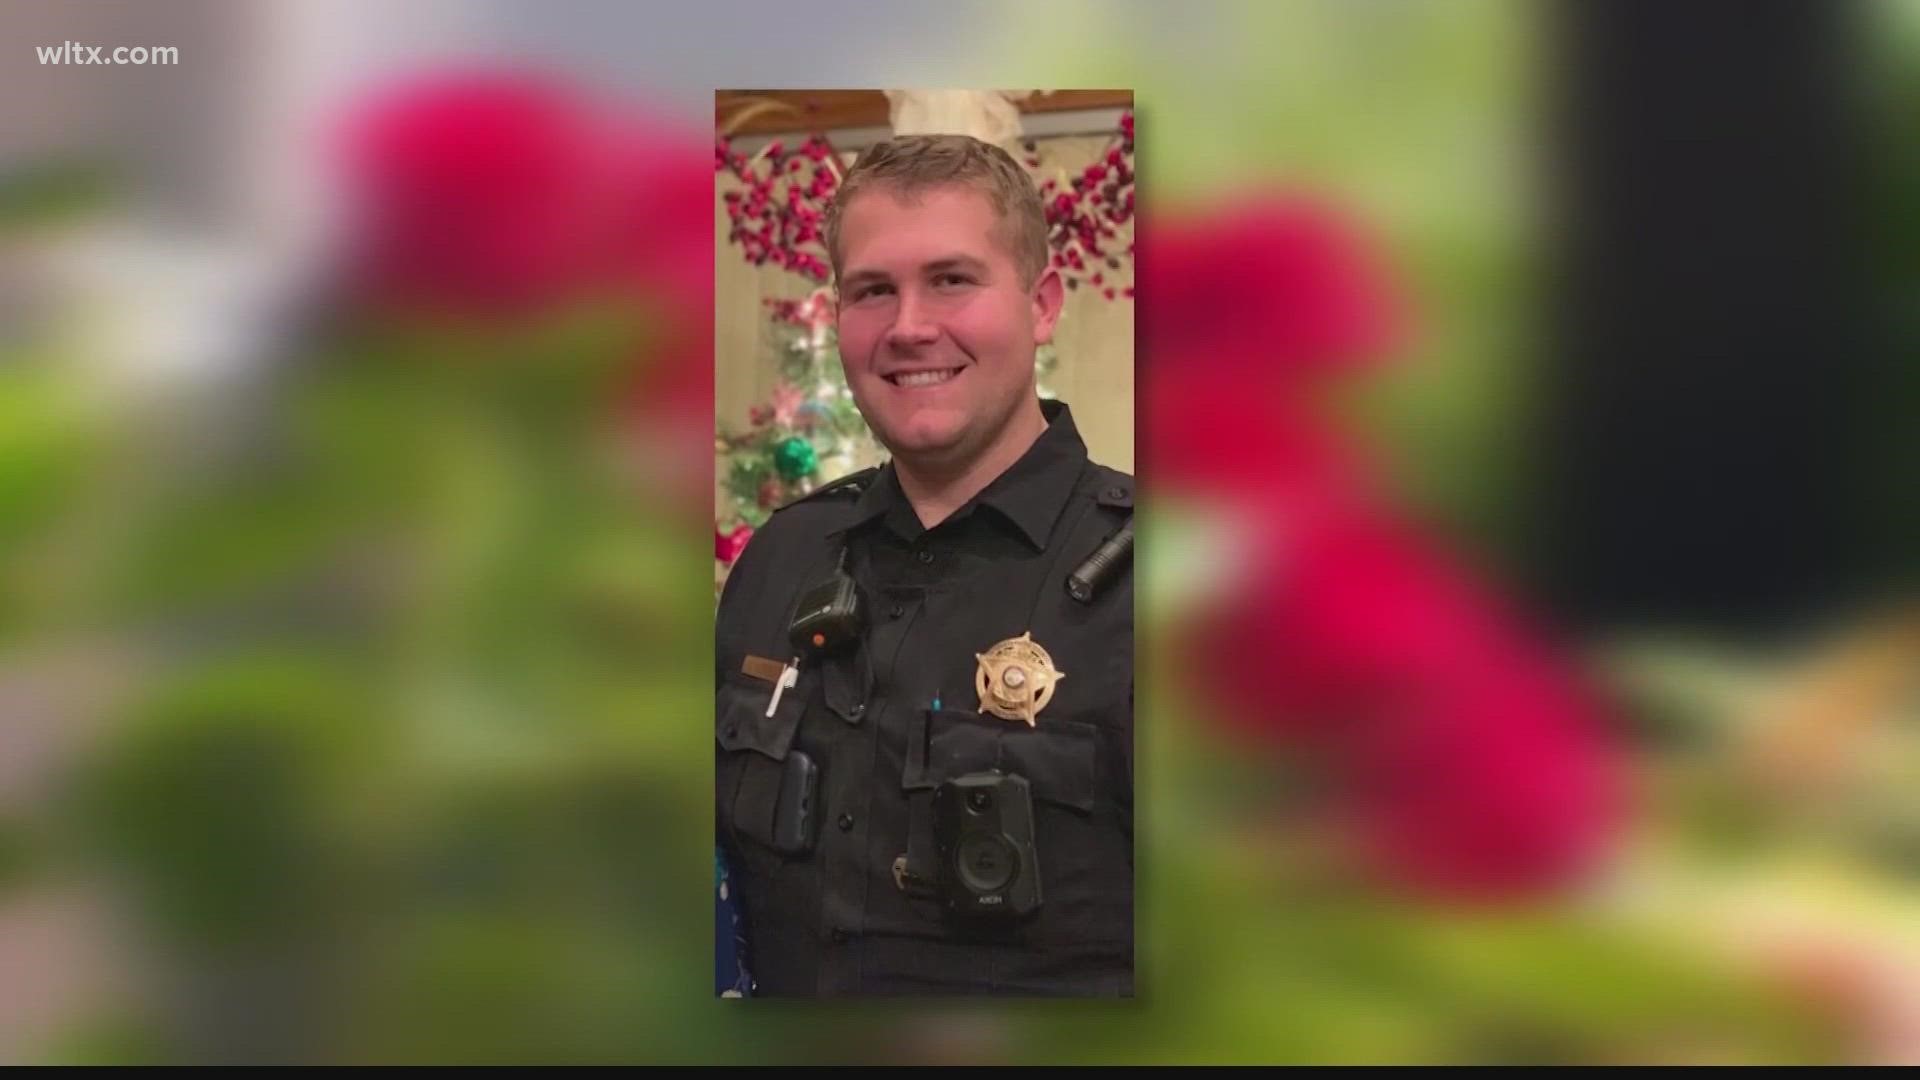 Spartanburg County Deputy Austin Aldridge was killed while responding to a domestic violence call. He was 25-years-old.